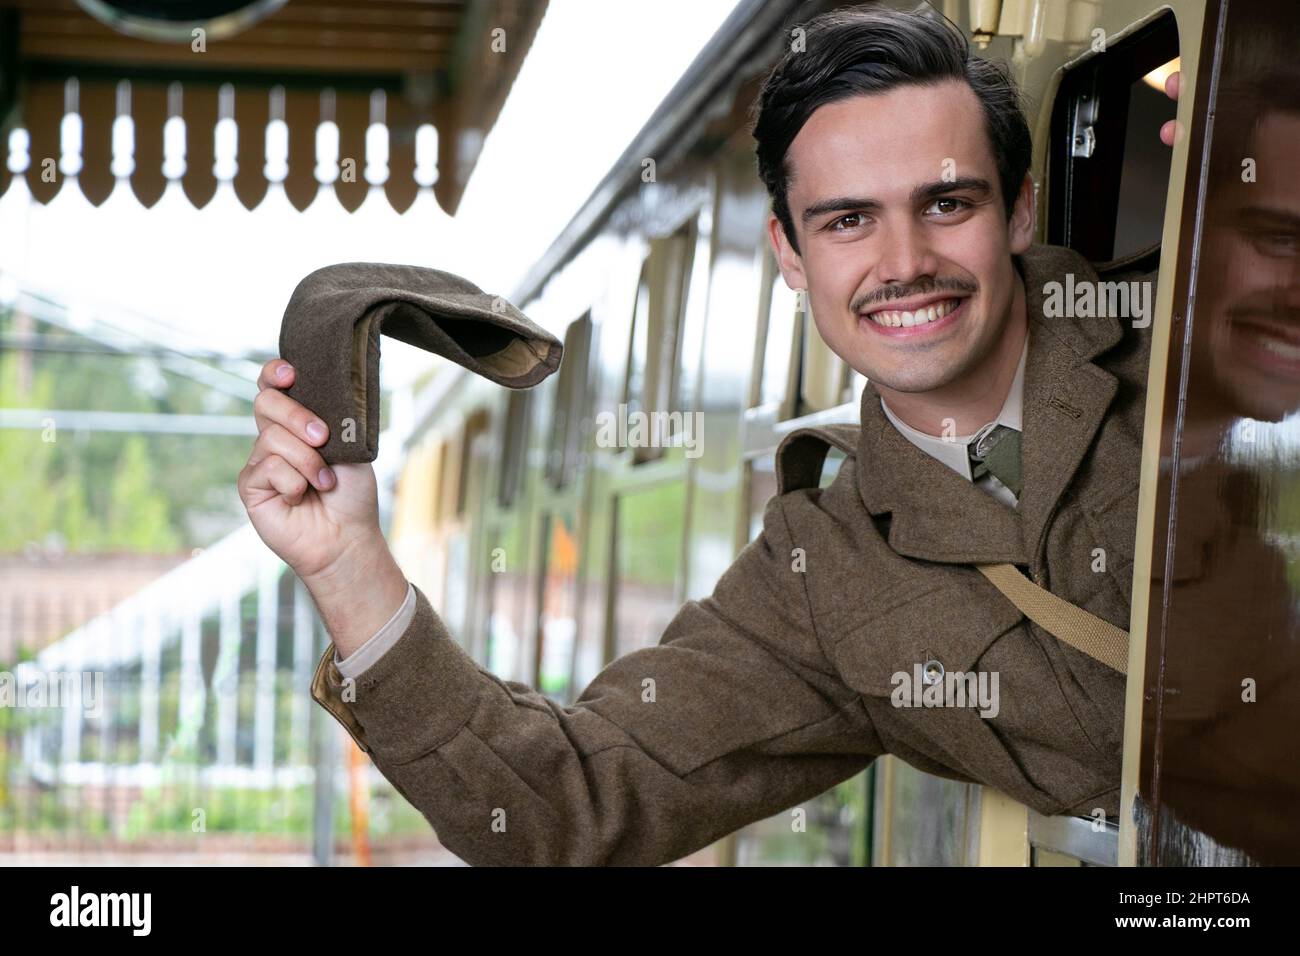 Attractive male british soldier in vintage WW2 uniform at train station, leaning out of train window, waving, smiling. Stock Photo